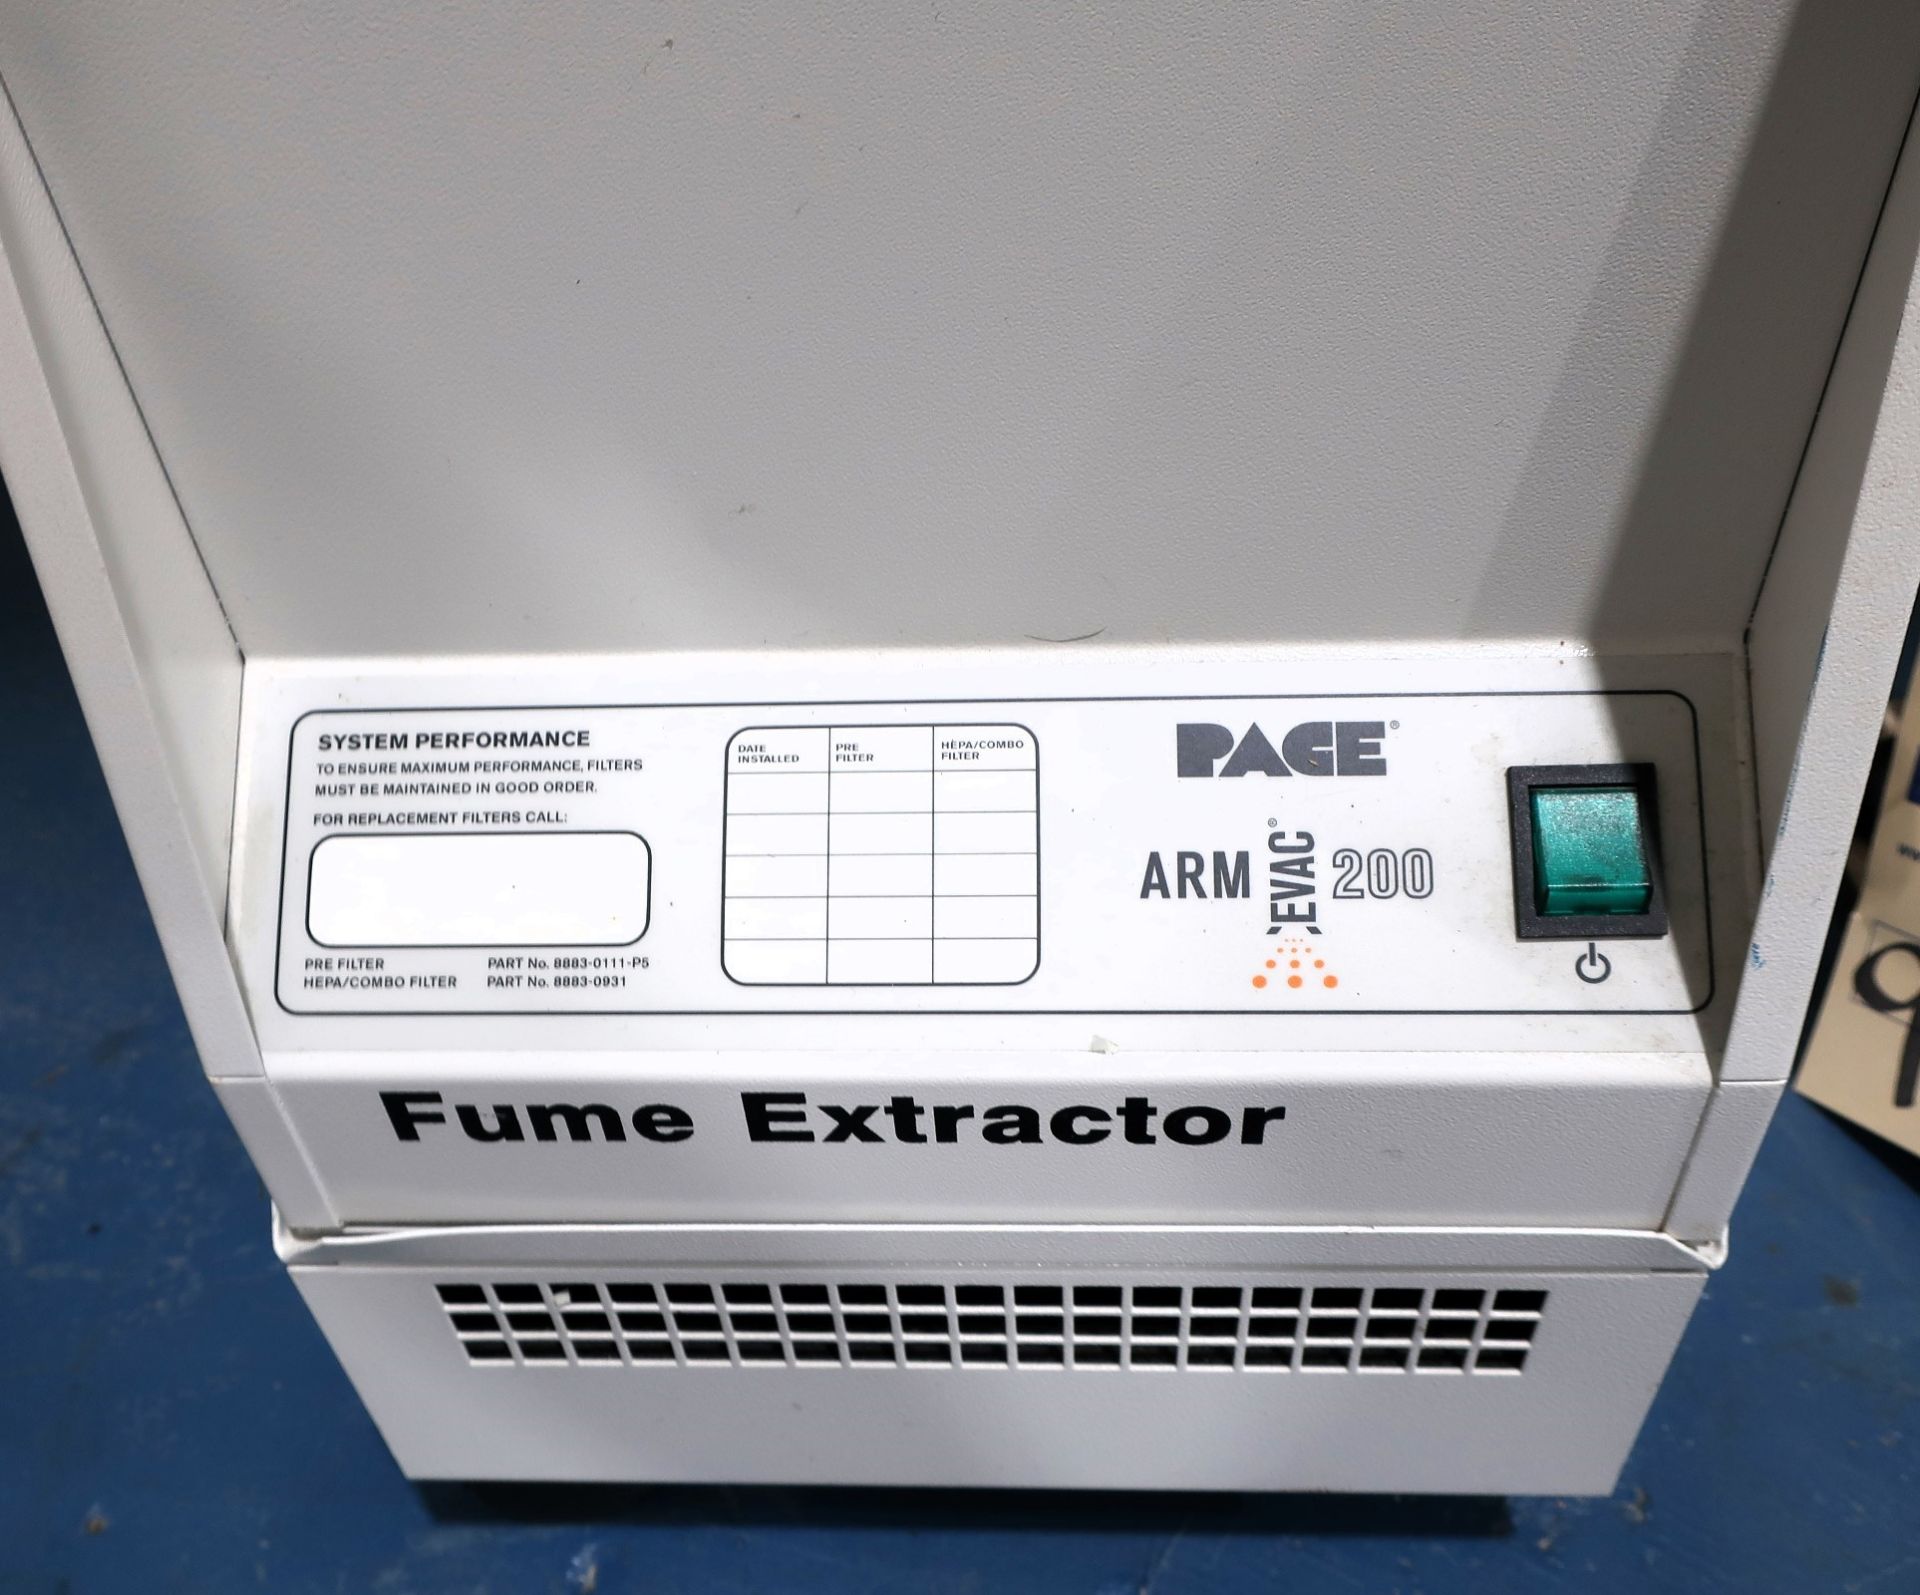 Pace Arm Evac 200 Fume Extractor, Model 8889-0205, SN 101100 - Image 2 of 3